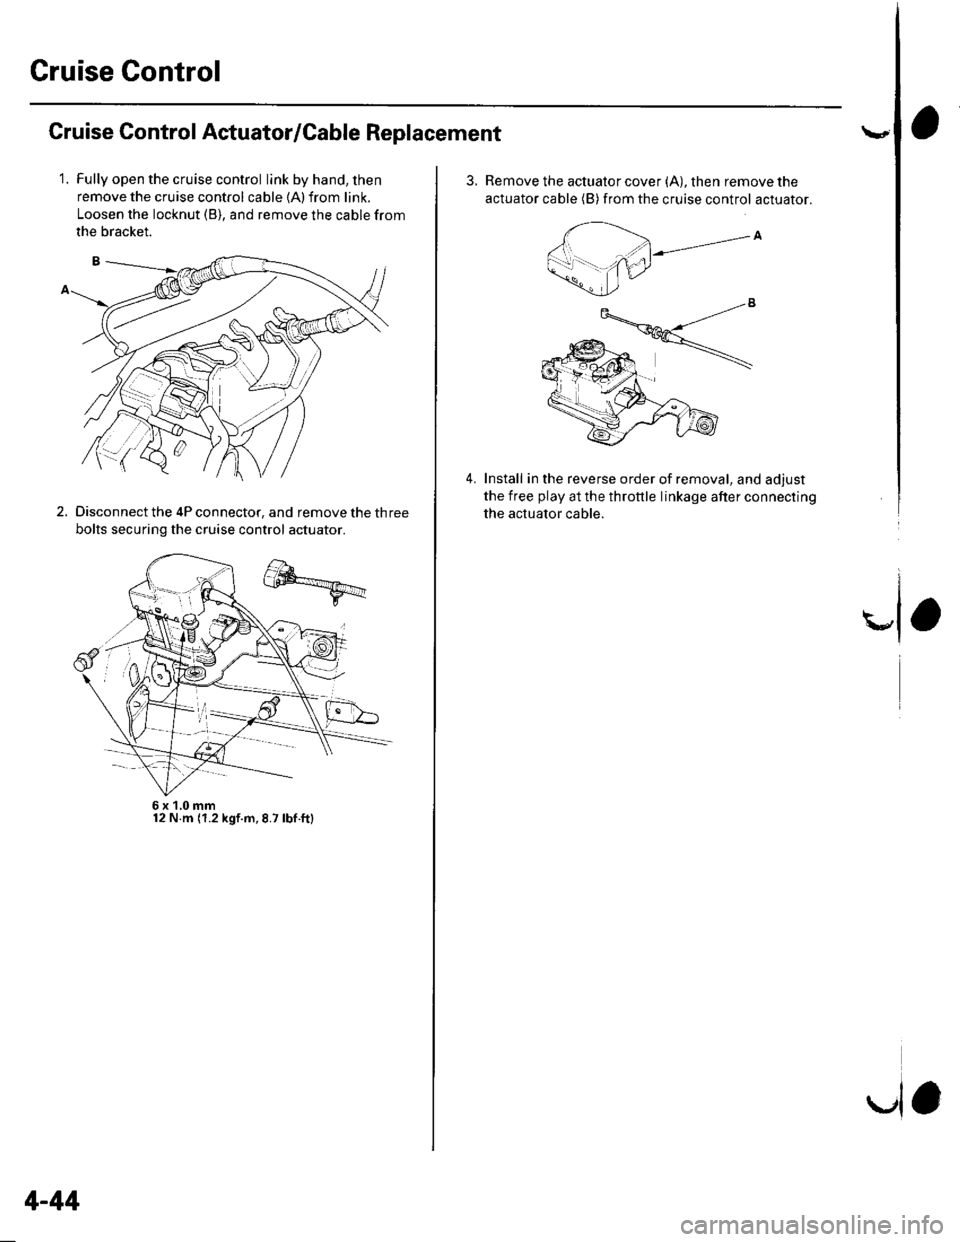 HONDA CIVIC 2003 7.G Workshop Manual Cruise Control
Cruise Control Actuator/Cable Replacement
1.Fully open the cruise control link by hand, then
remove the cruise control cable {A) from link.
Loosen the locknut (B), and remove the cable 